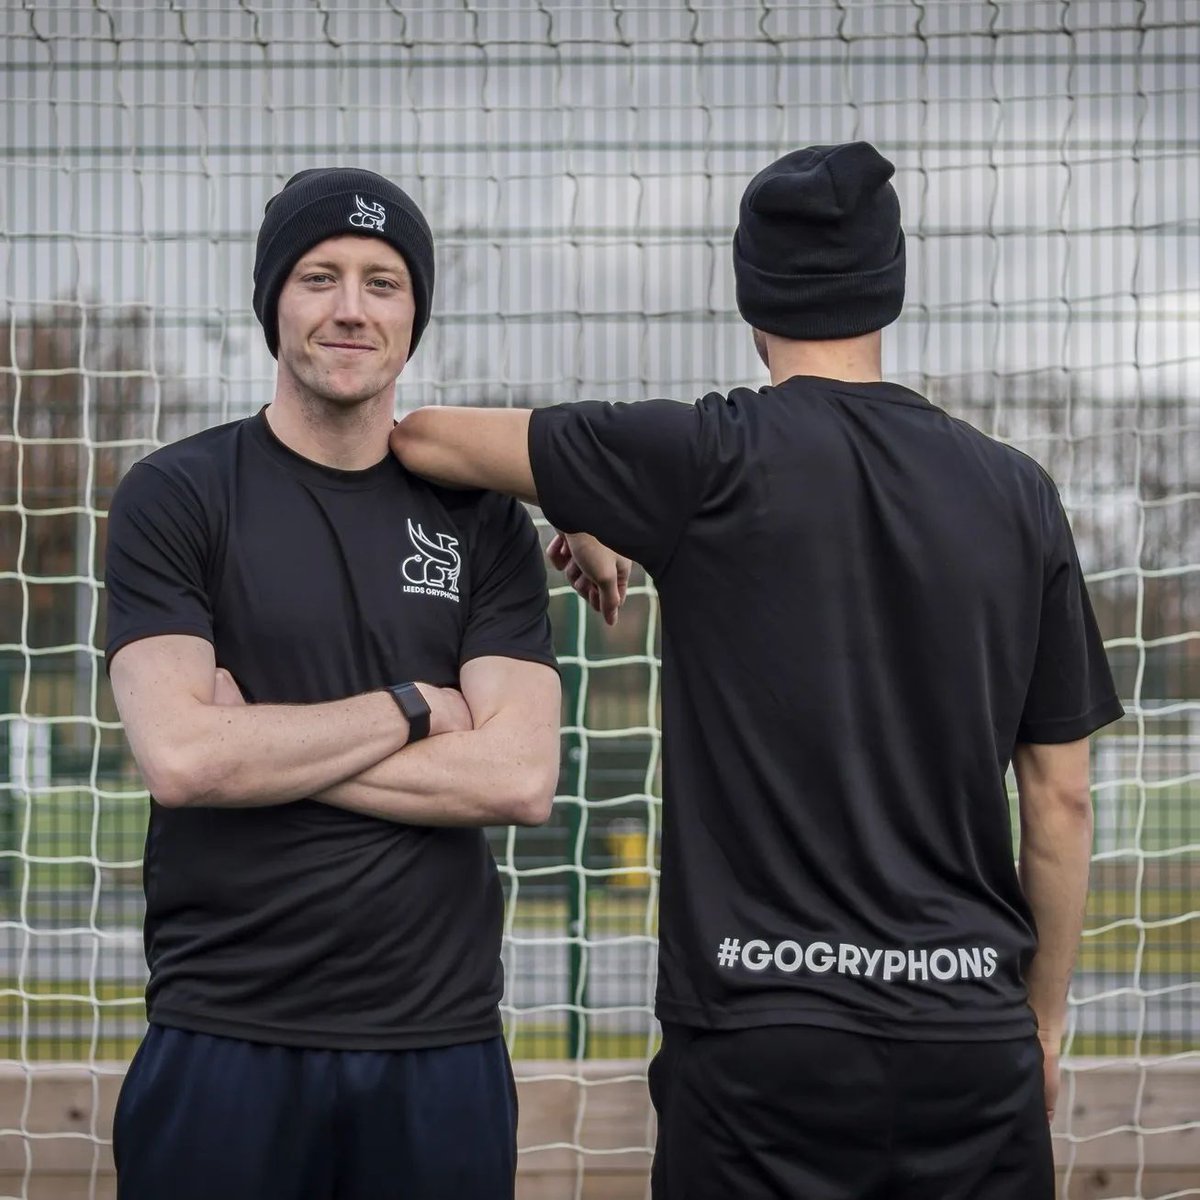 Introducing our new and exclusive Gryphon merch! From stylish tote bags to unbeatable training tees, cosy beanies to trendy bucket hats 😎 Elevate your game on and off the field, whilst proudly repping the Gryphon 💚 All available to purchase at @theedgegymleeds reception ✨